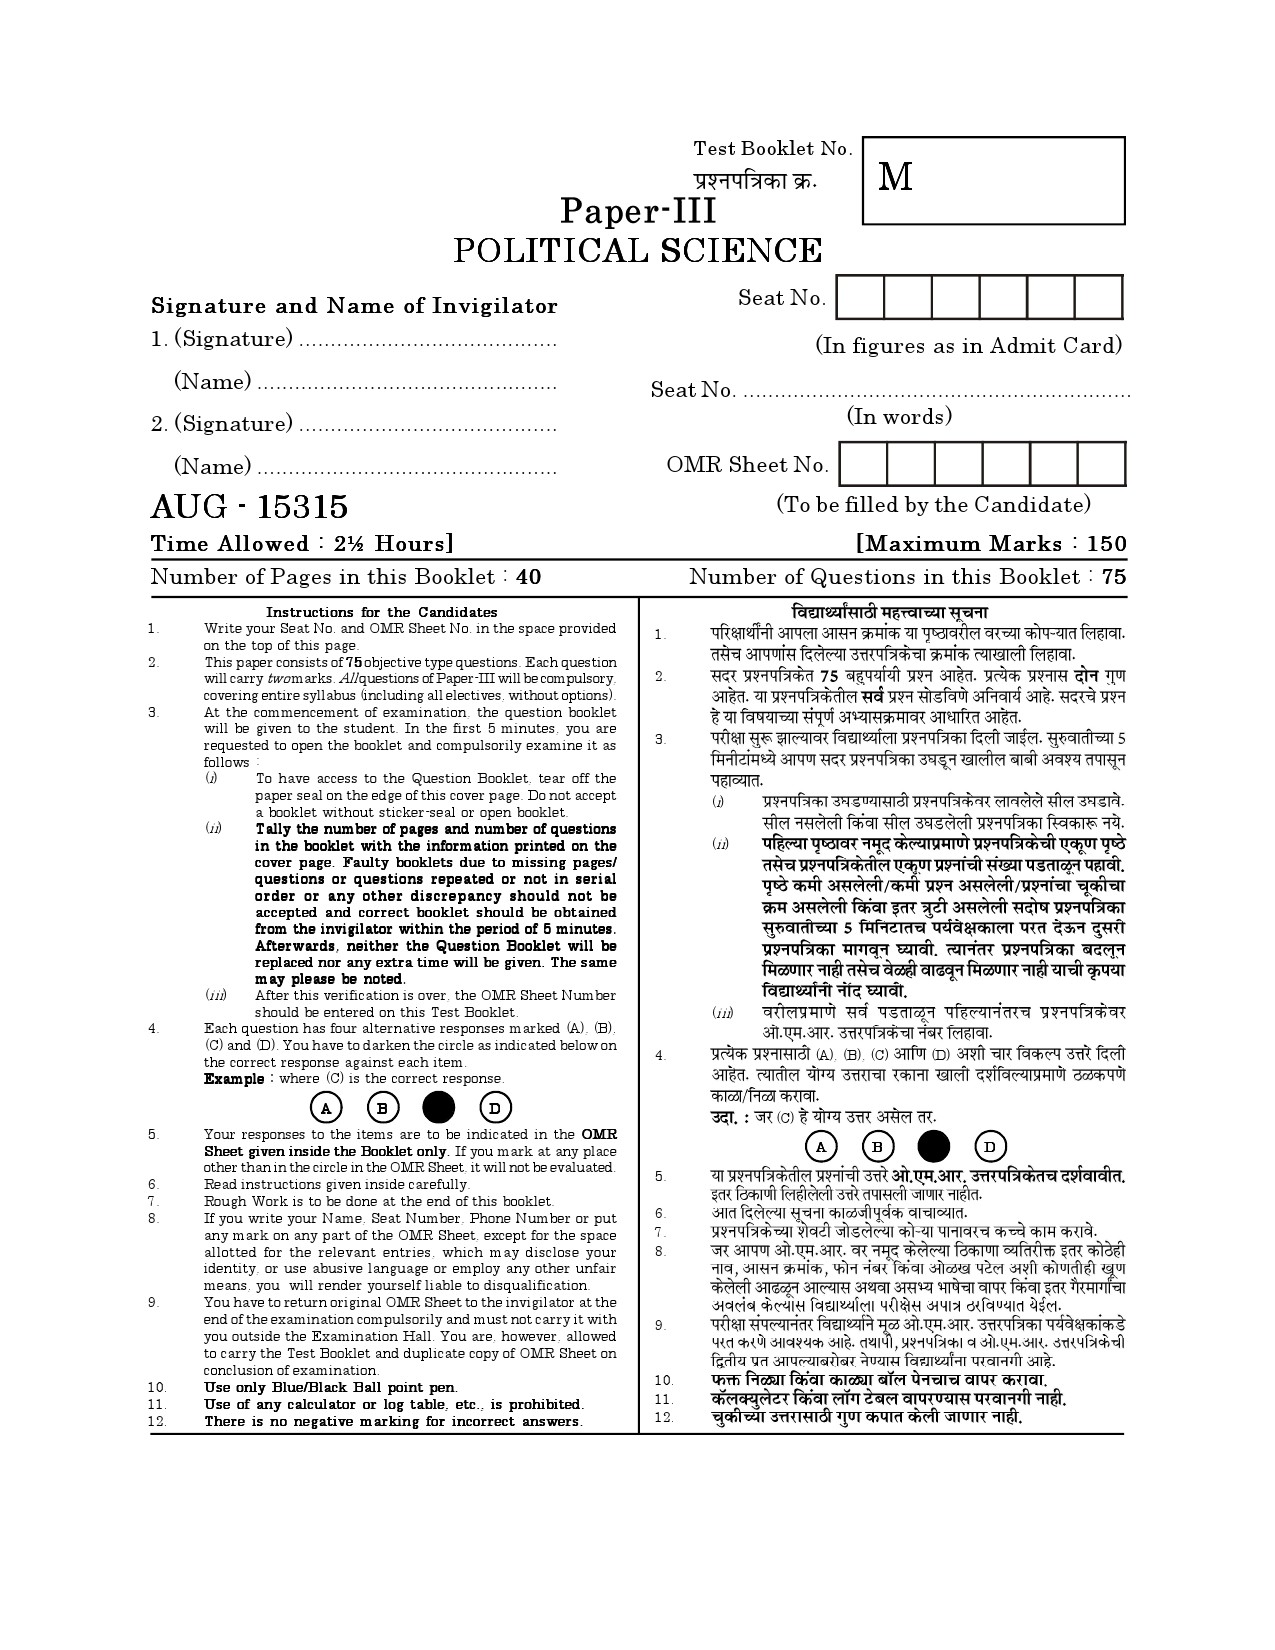 Maharashtra SET Political Science Question Paper III August 2015 1